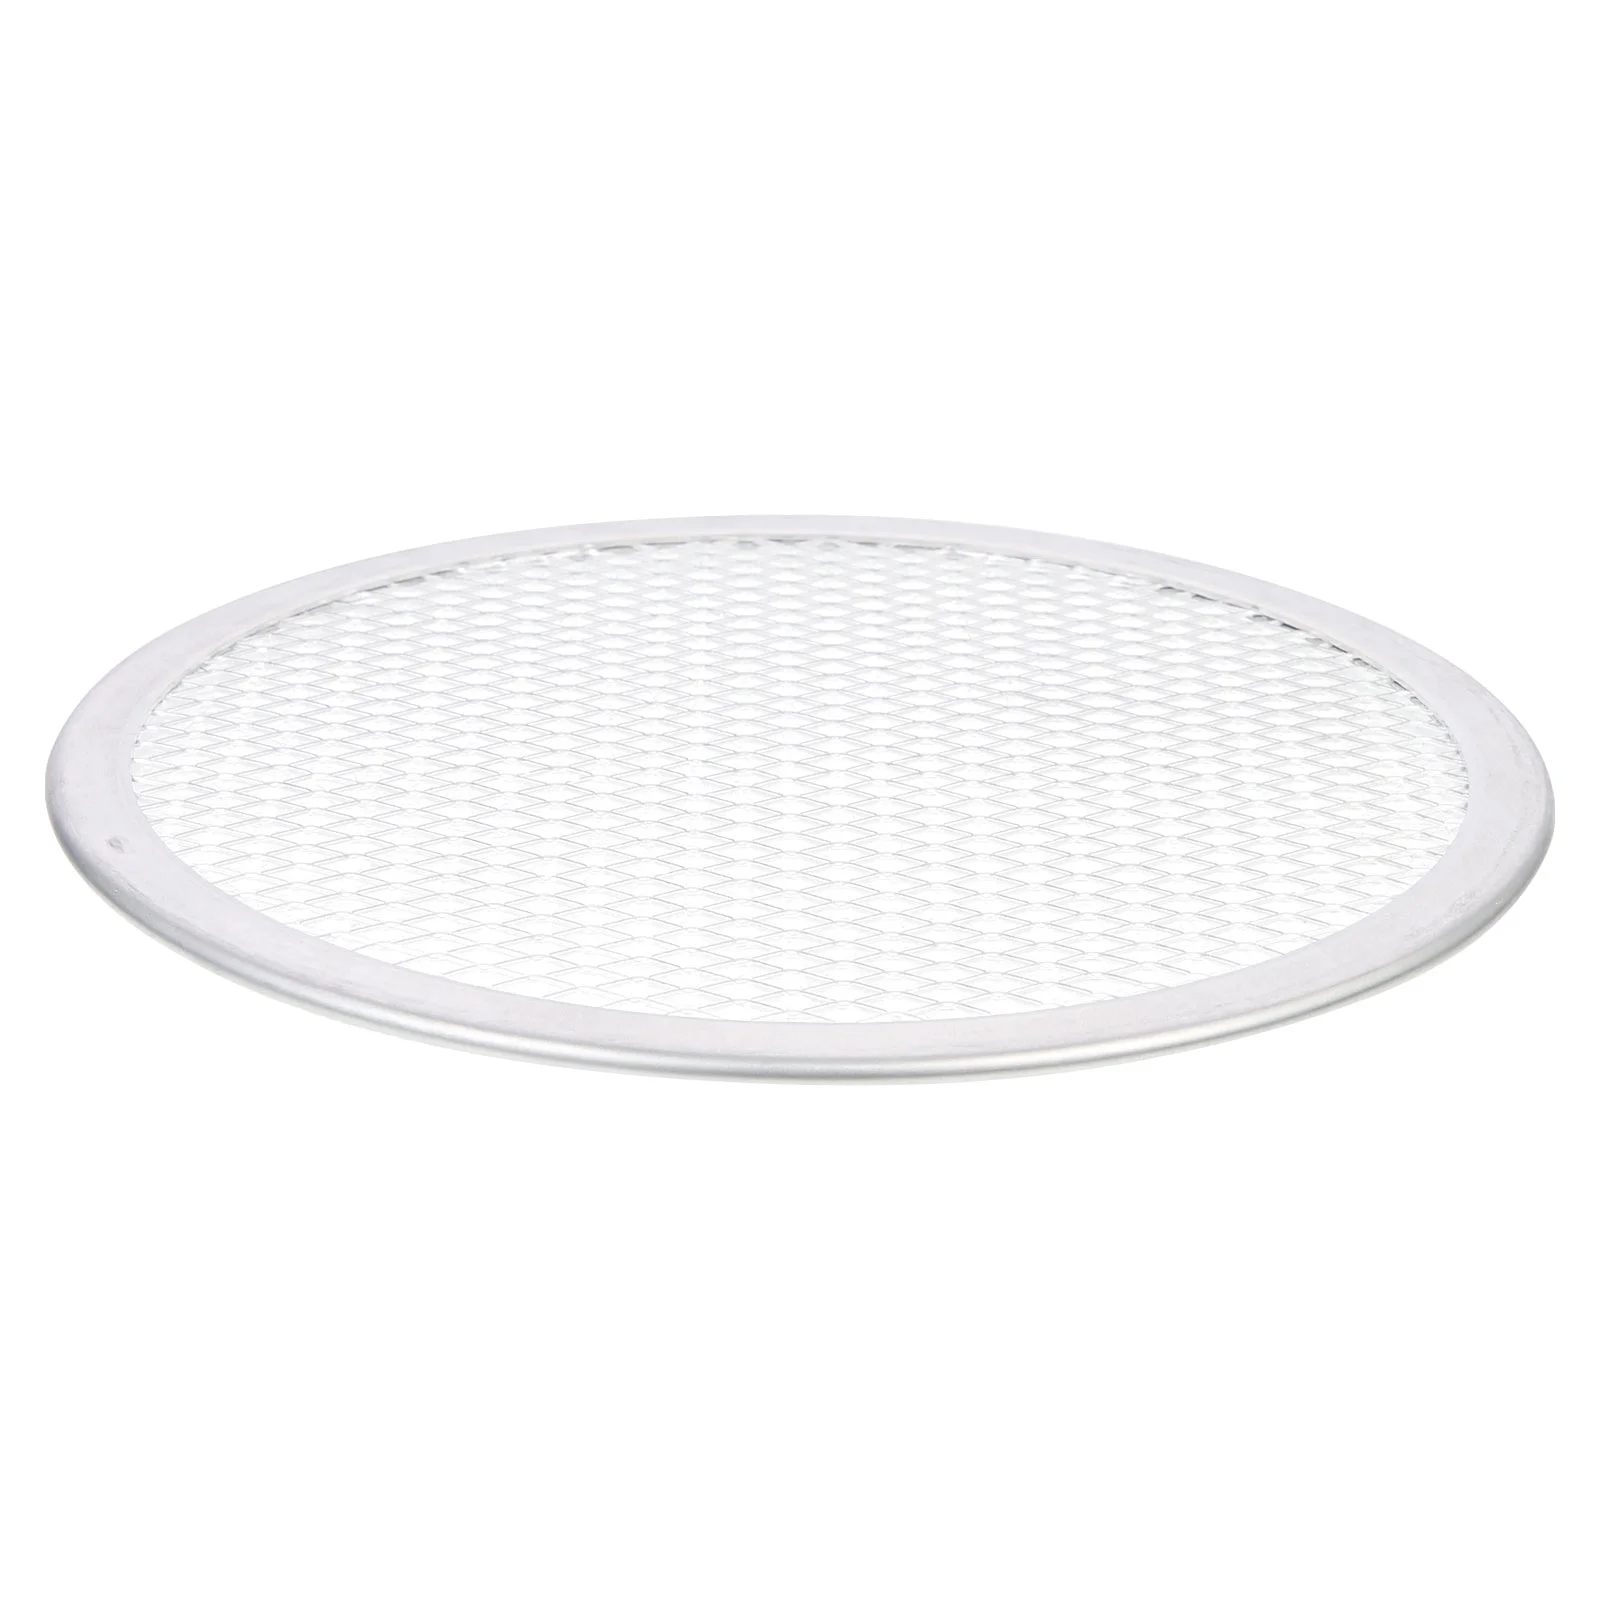 

Pizza Pan Tray Baking Screen Non Plate Stick Oven Mesh Holesfor Metal Bakeware Round Crisper Sheet Kitchen Sticky Stainless